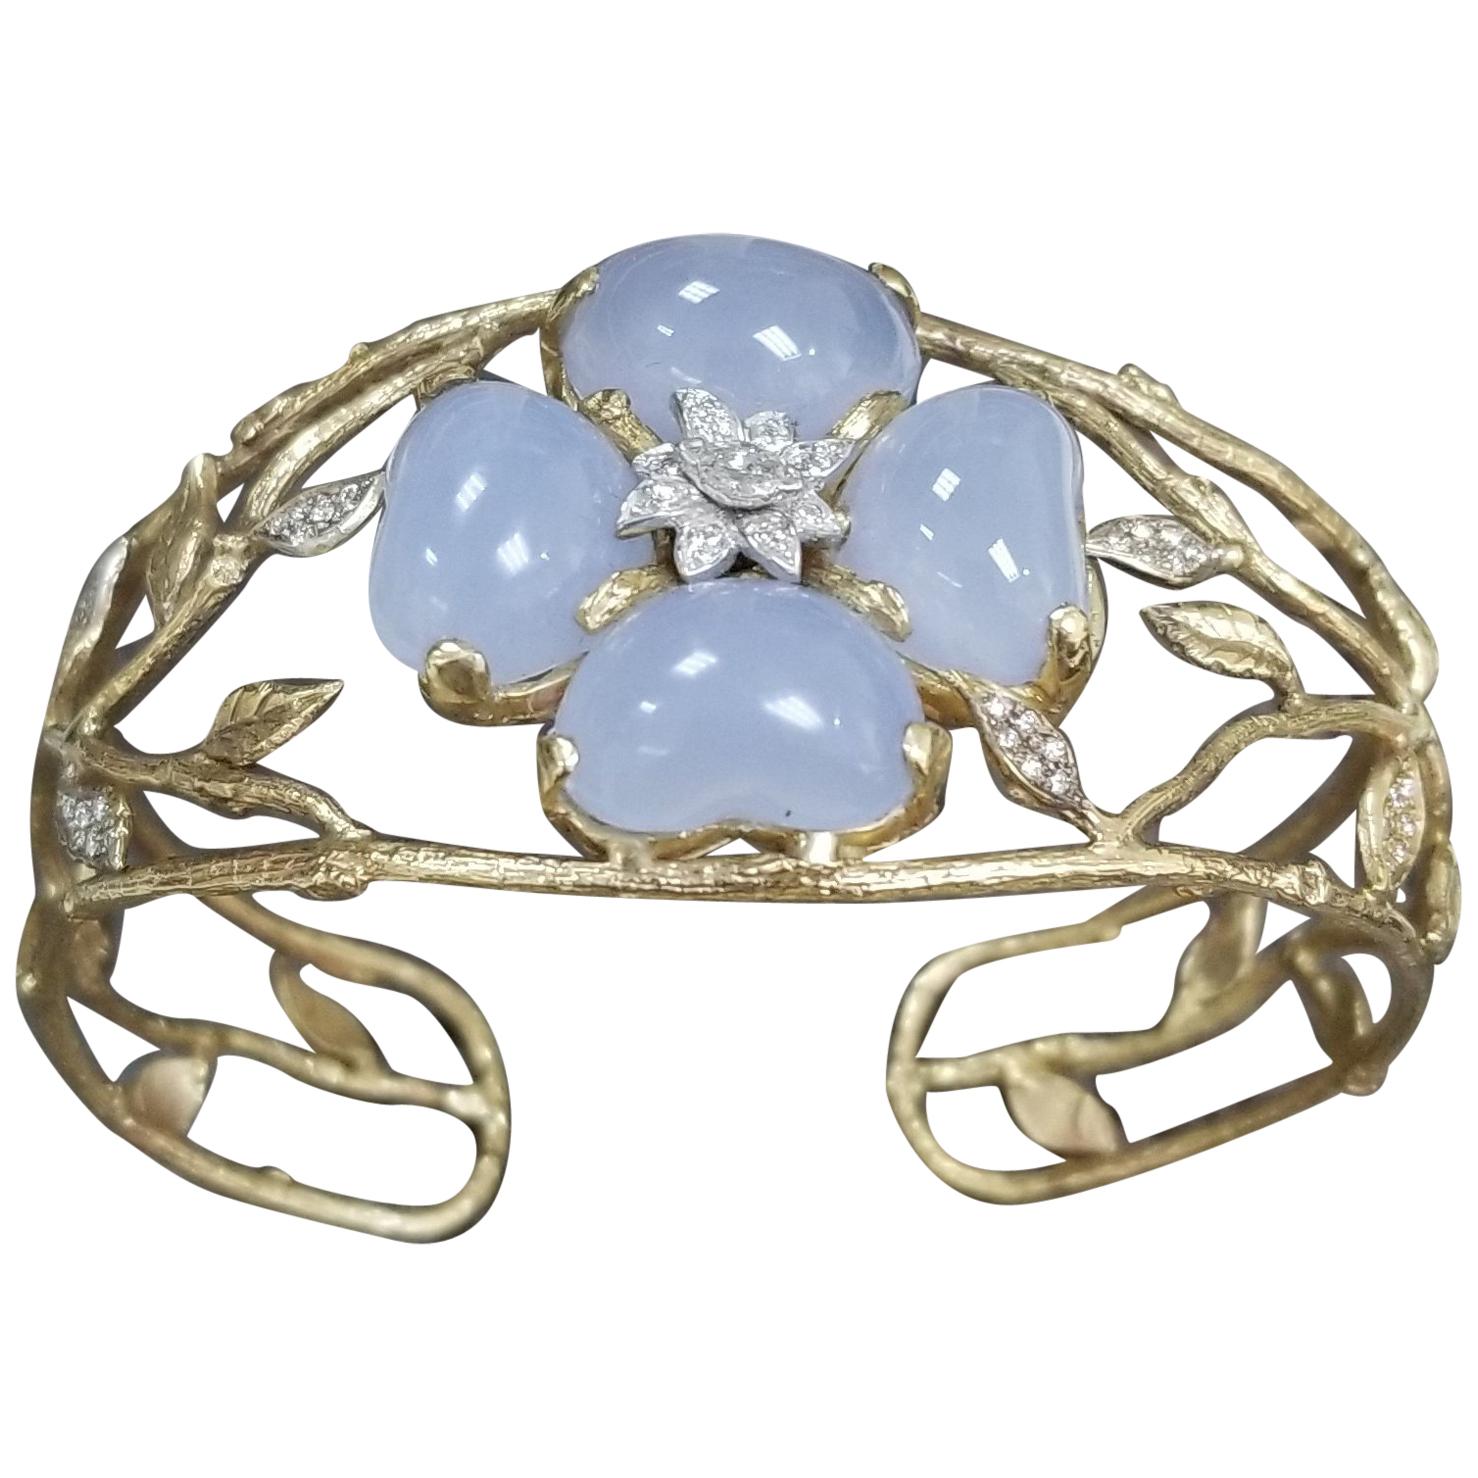 "Gresha" 14K Gold w 4 Heart Shape Cut Cabochon Blue Chalcedony Weighing 29.05ct For Sale